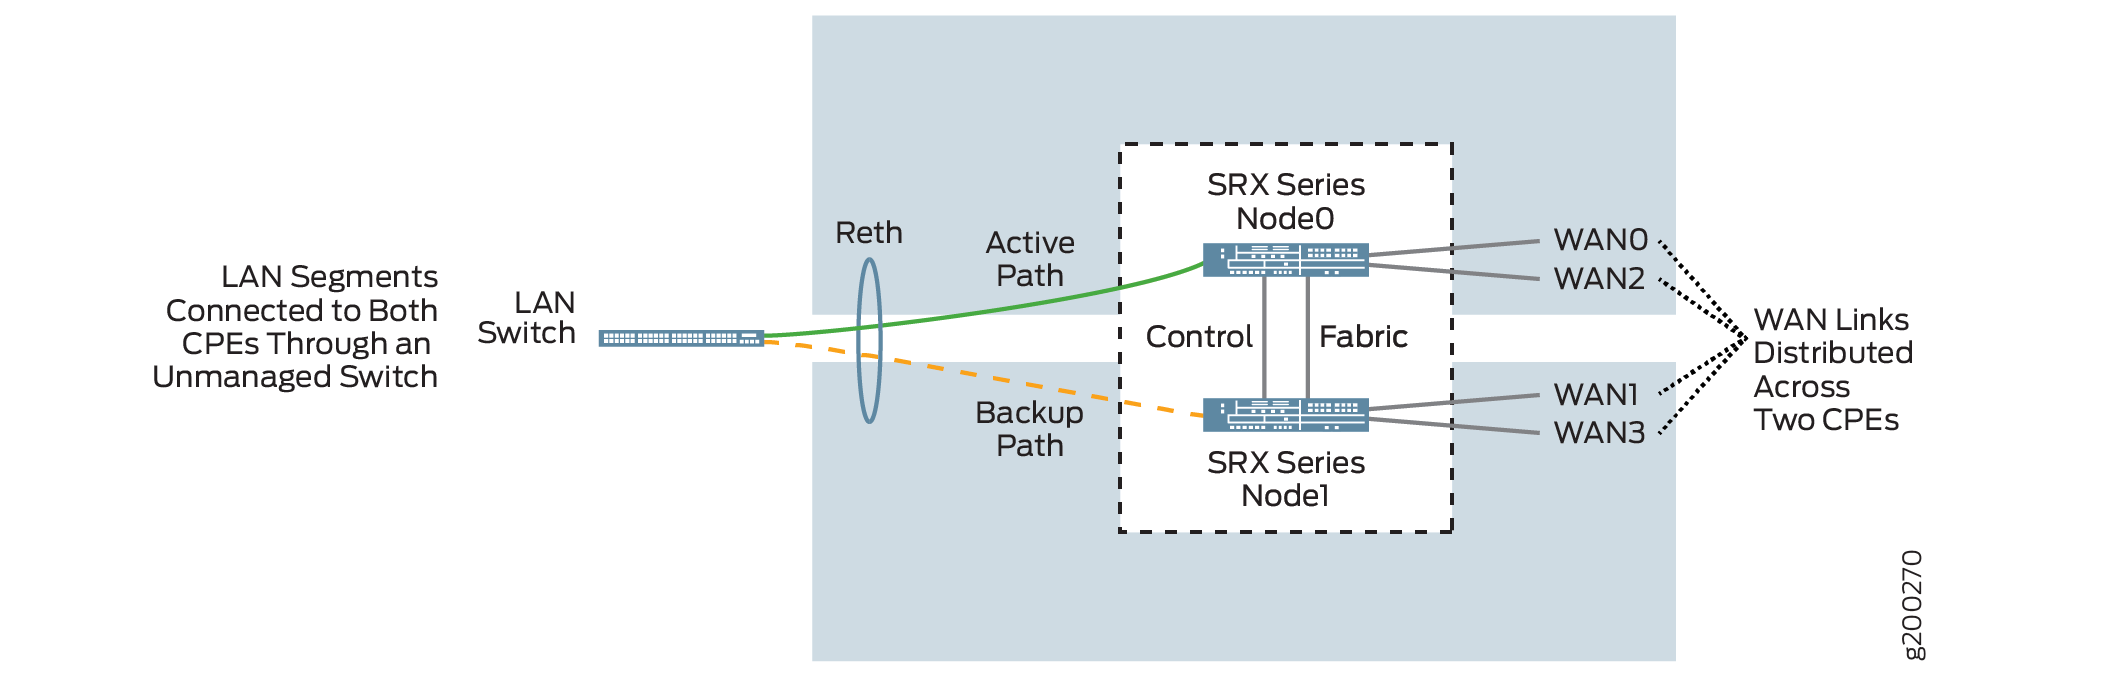 Dual CPE Device Topology - SRX Series Devices